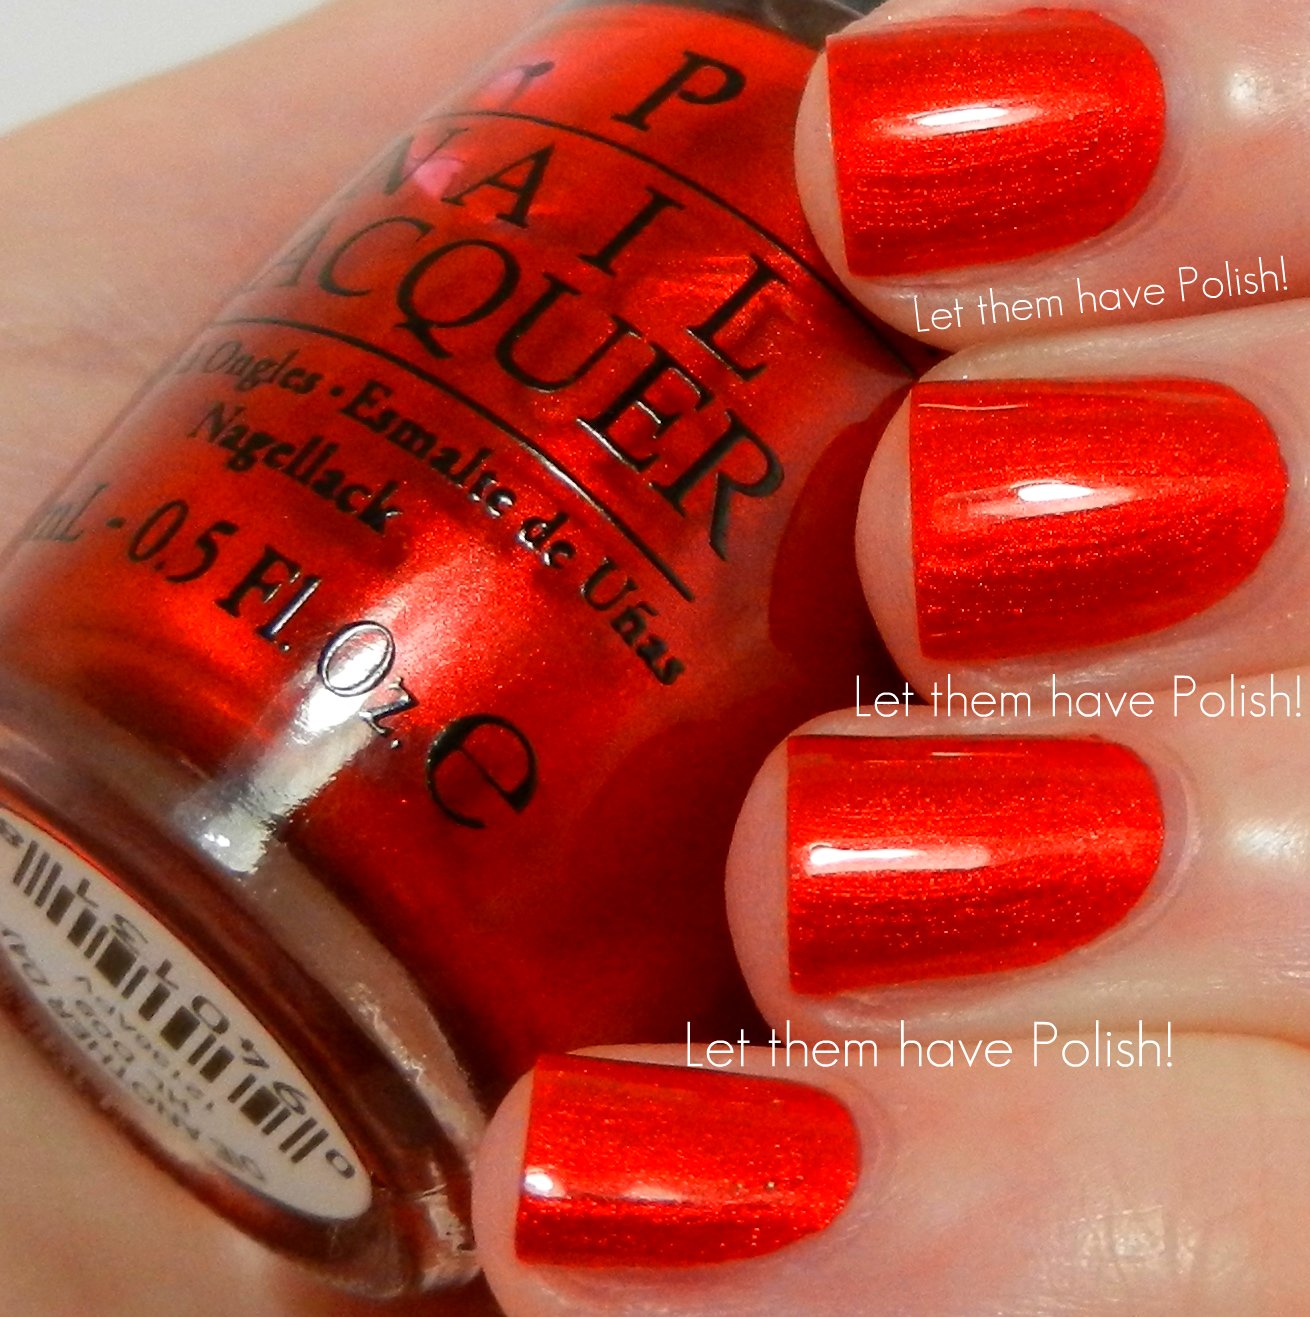 Let them have Polish!: O.P.I Skyfall Collection Swatches